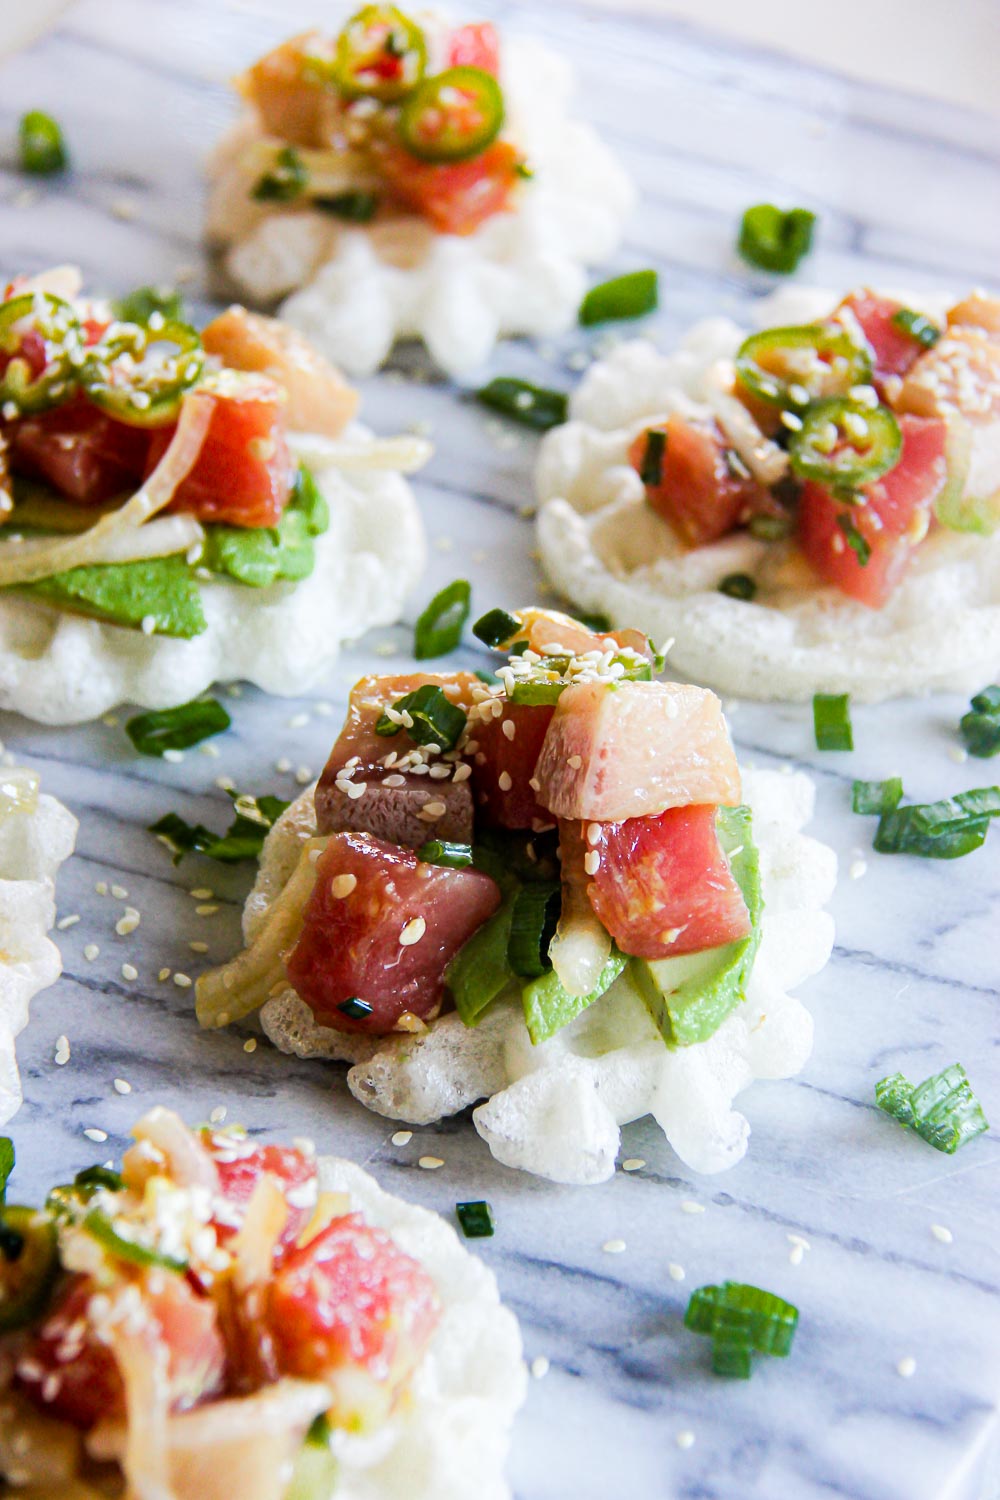 Create a little taste of aloha in your kitchen! These Tuna Poke Mochi Waffles make a fun appetizer - delicious, easy, super nutritious and so refreshing.